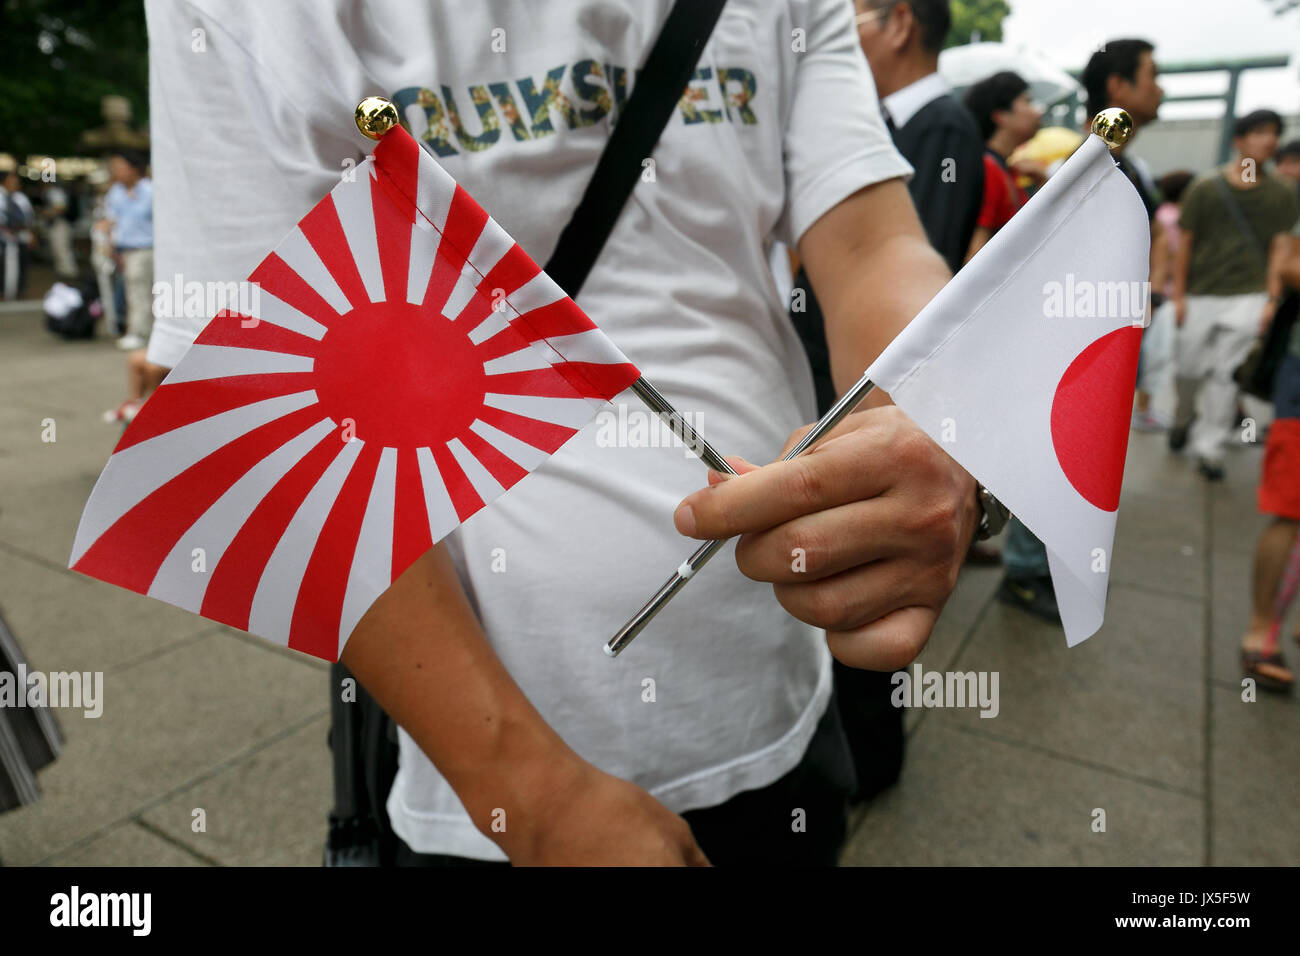 Tokyo, Japan. 15th Aug, 2017. A man holds war flags of the Imperial Japanese Army to pay his respects to the war dead at Yasukuni Shrine on the 72nd anniversary of Japan's surrender in World War II on August 15, 2017, Tokyo, Japan. Prime Minister Shinzo Abe was not among the lawmakers to visit the Shrine and instead sent a ritual offering to avoid angering neighboring countries who also associate Yasukuni with war criminals and Japan's imperial past. Credit: Rodrigo Reyes Marin/AFLO/Alamy Live News Stock Photo